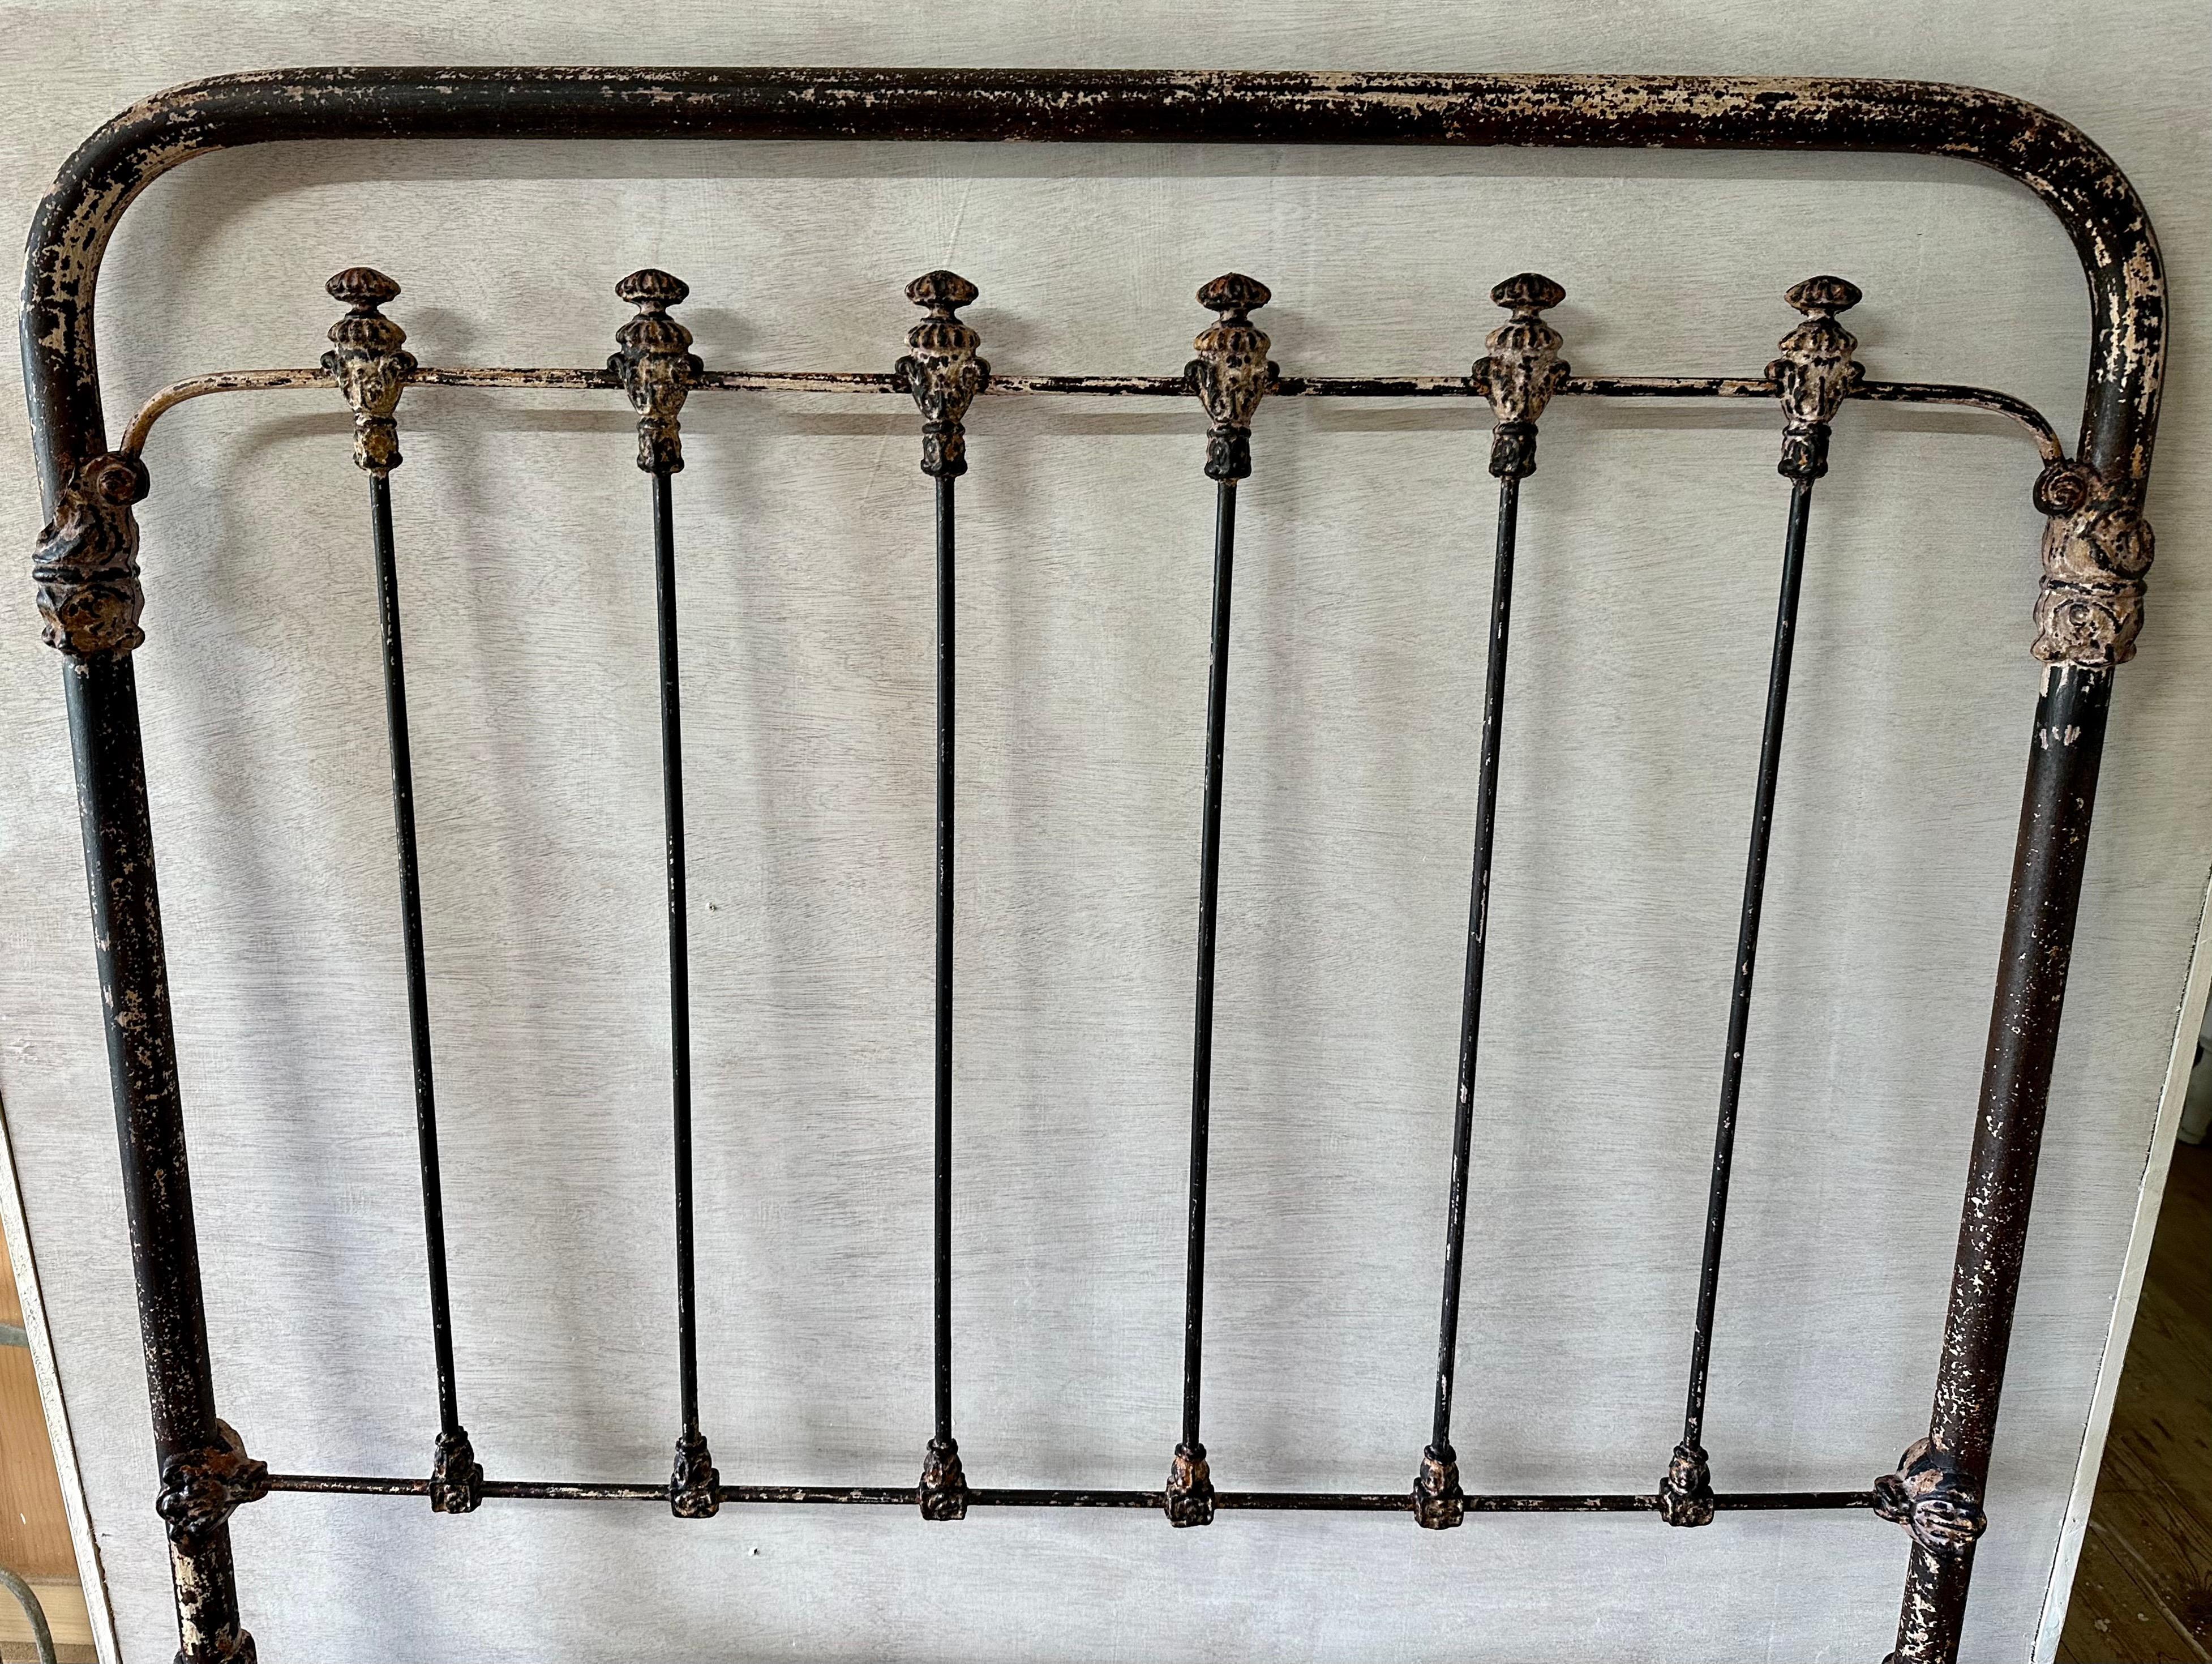 The antique country iron twin size headboard has a wonderfully, natural distressed look with just enough paint remaining to add interest and character.  
We have cleaned it up and has been clear coated to prevent remaining paint from peeling and